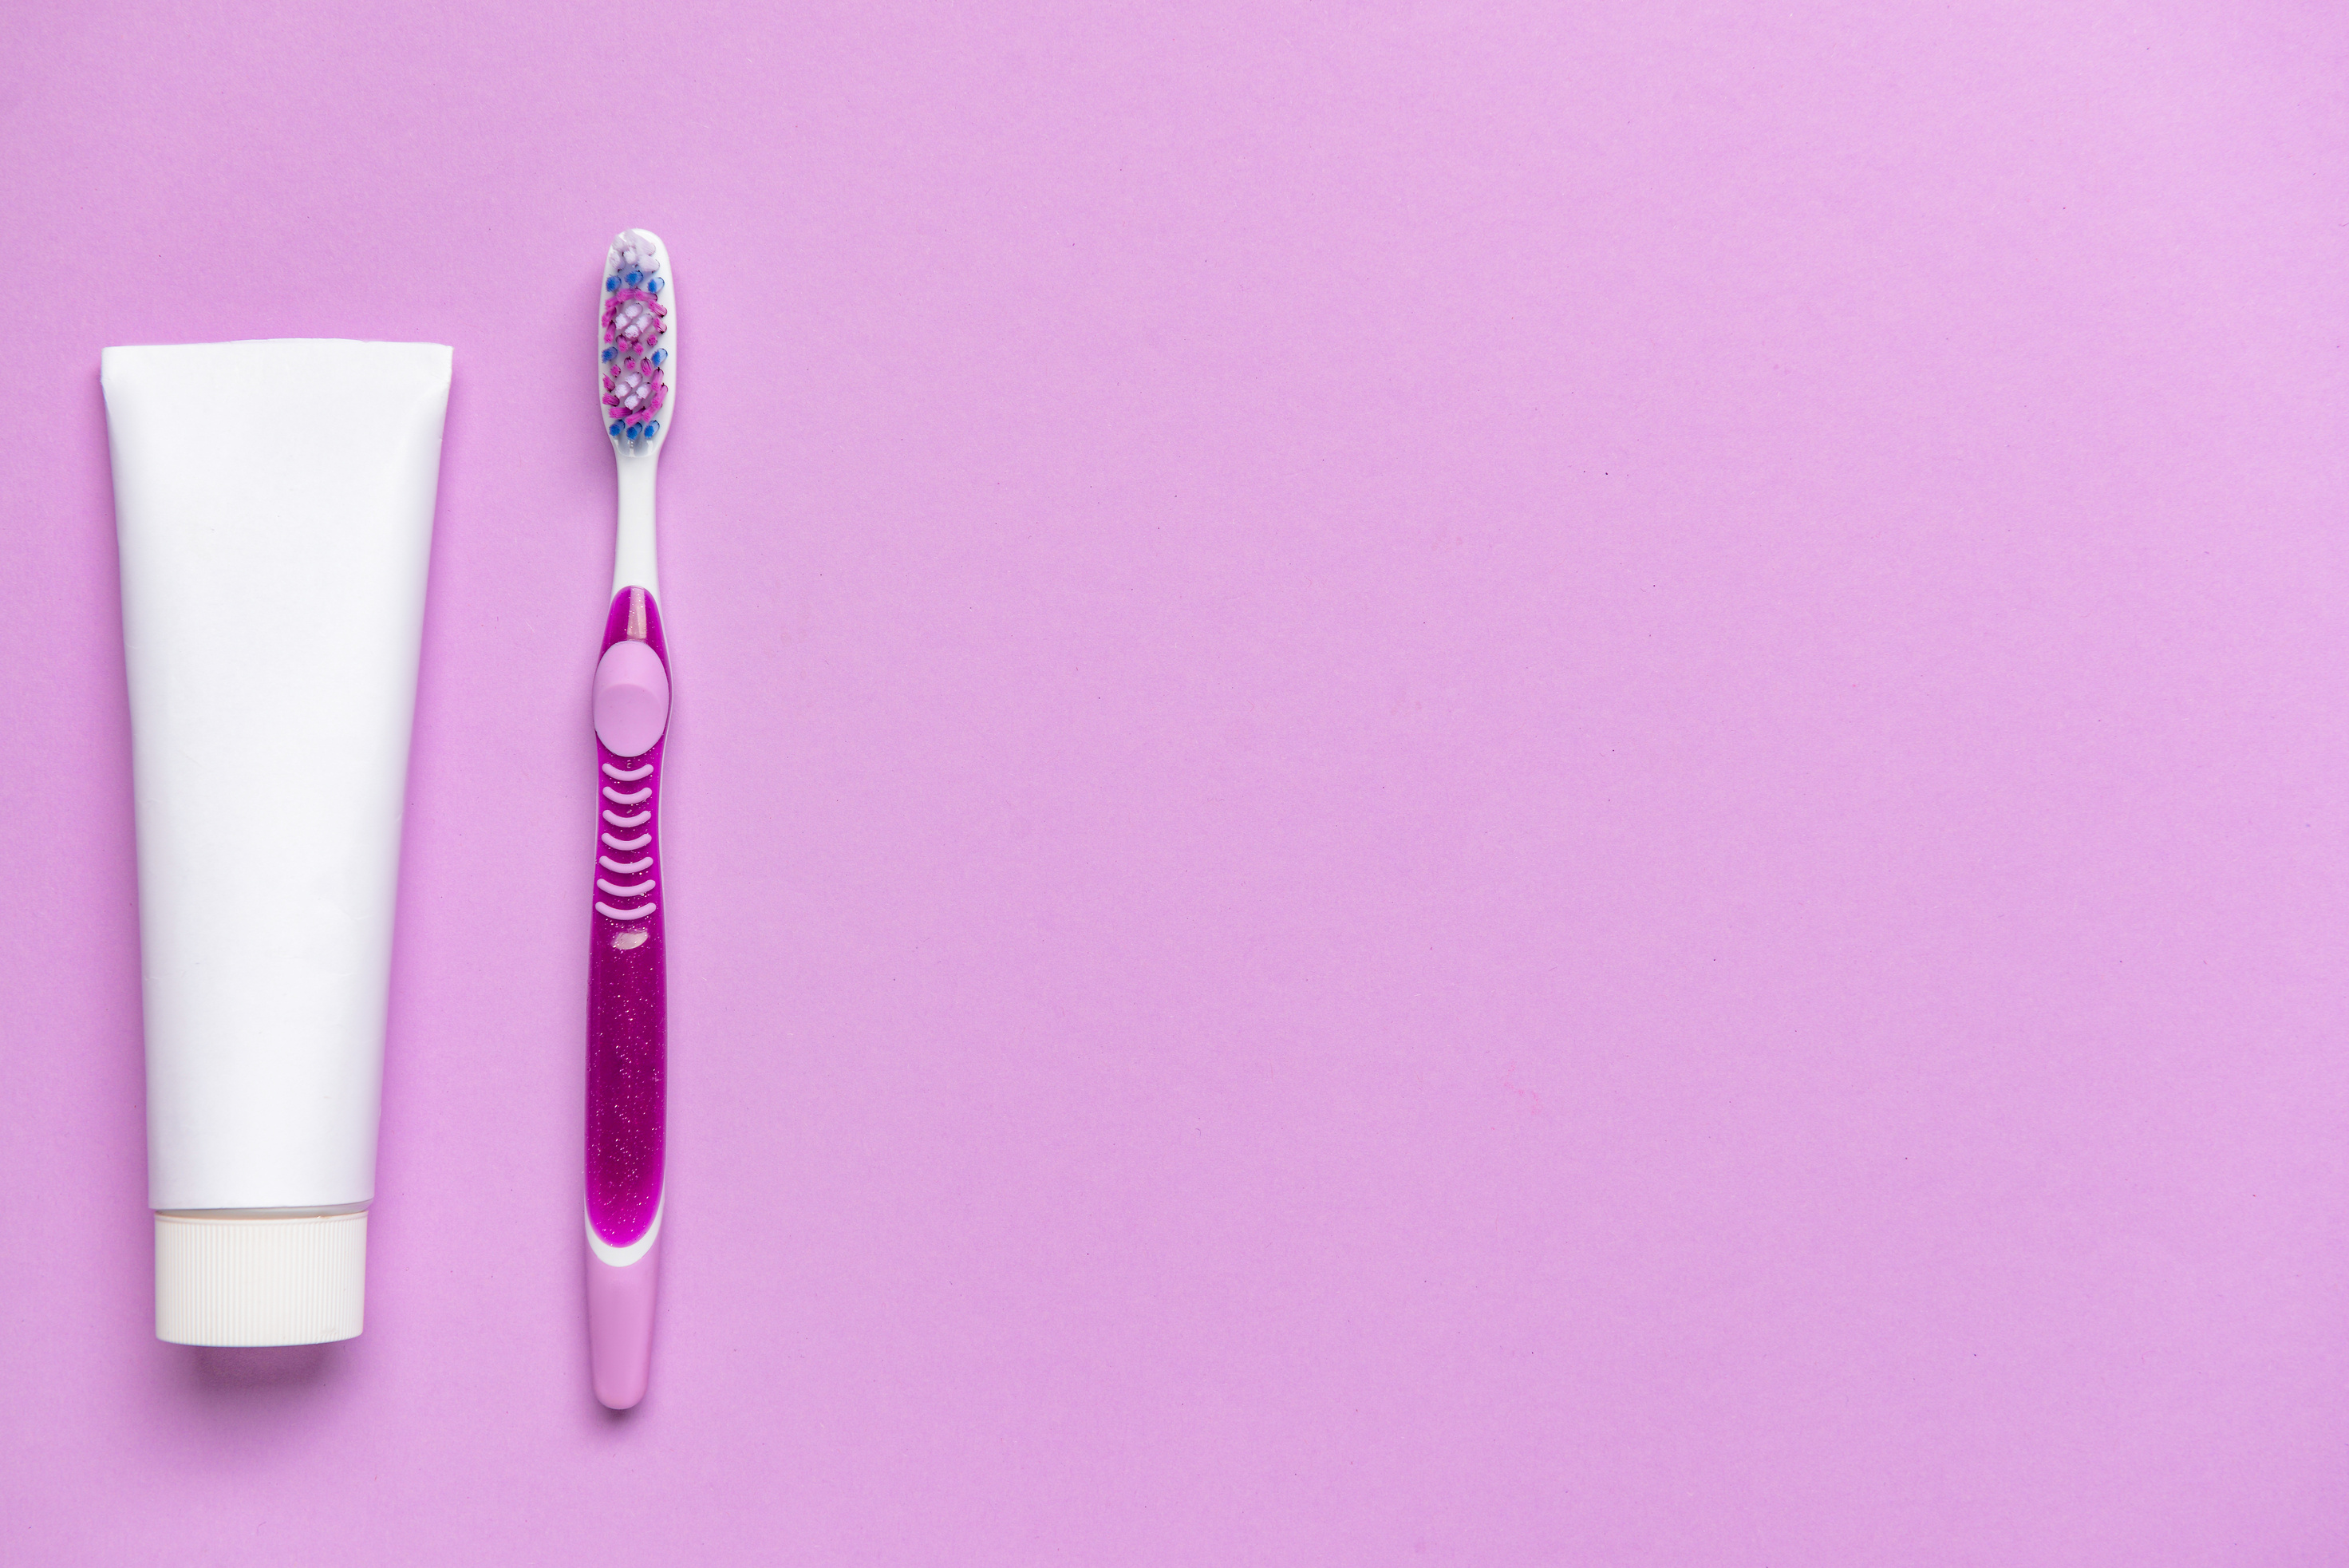 Toothbrush and Paste on Purple Background